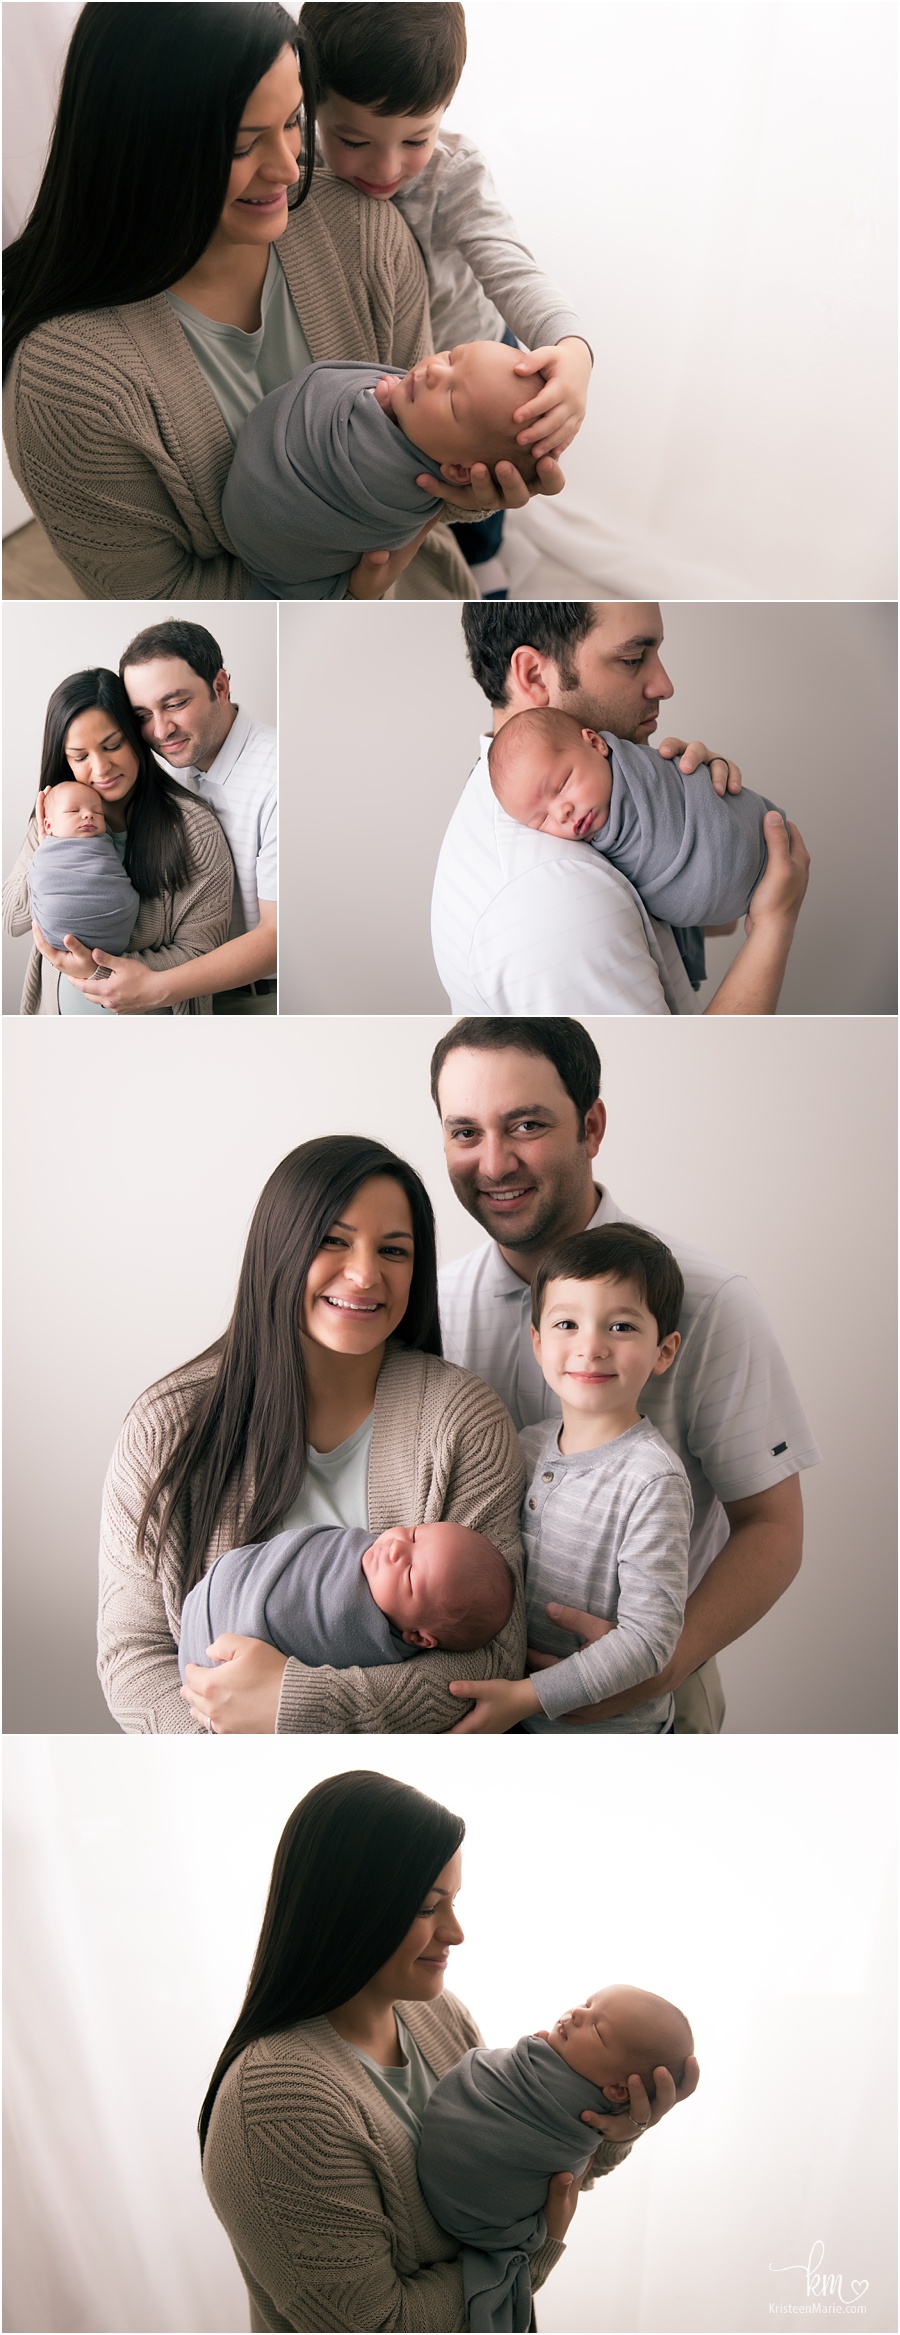 family poses with newborn baby and older brother and parents